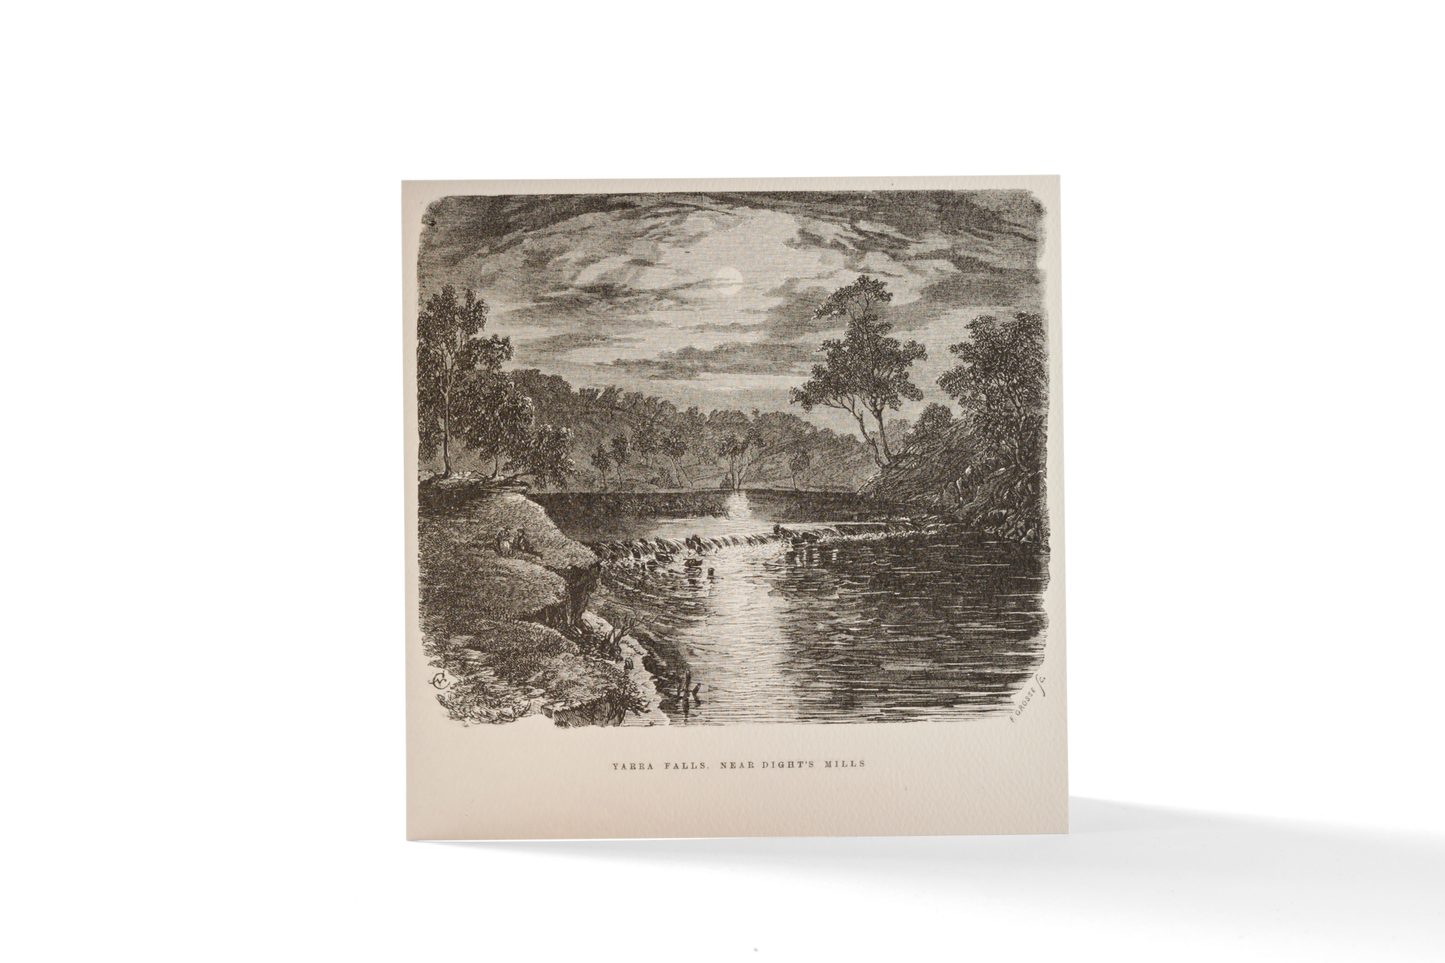 Greeting card with illustration of the Yarra Rivers Dight Falls